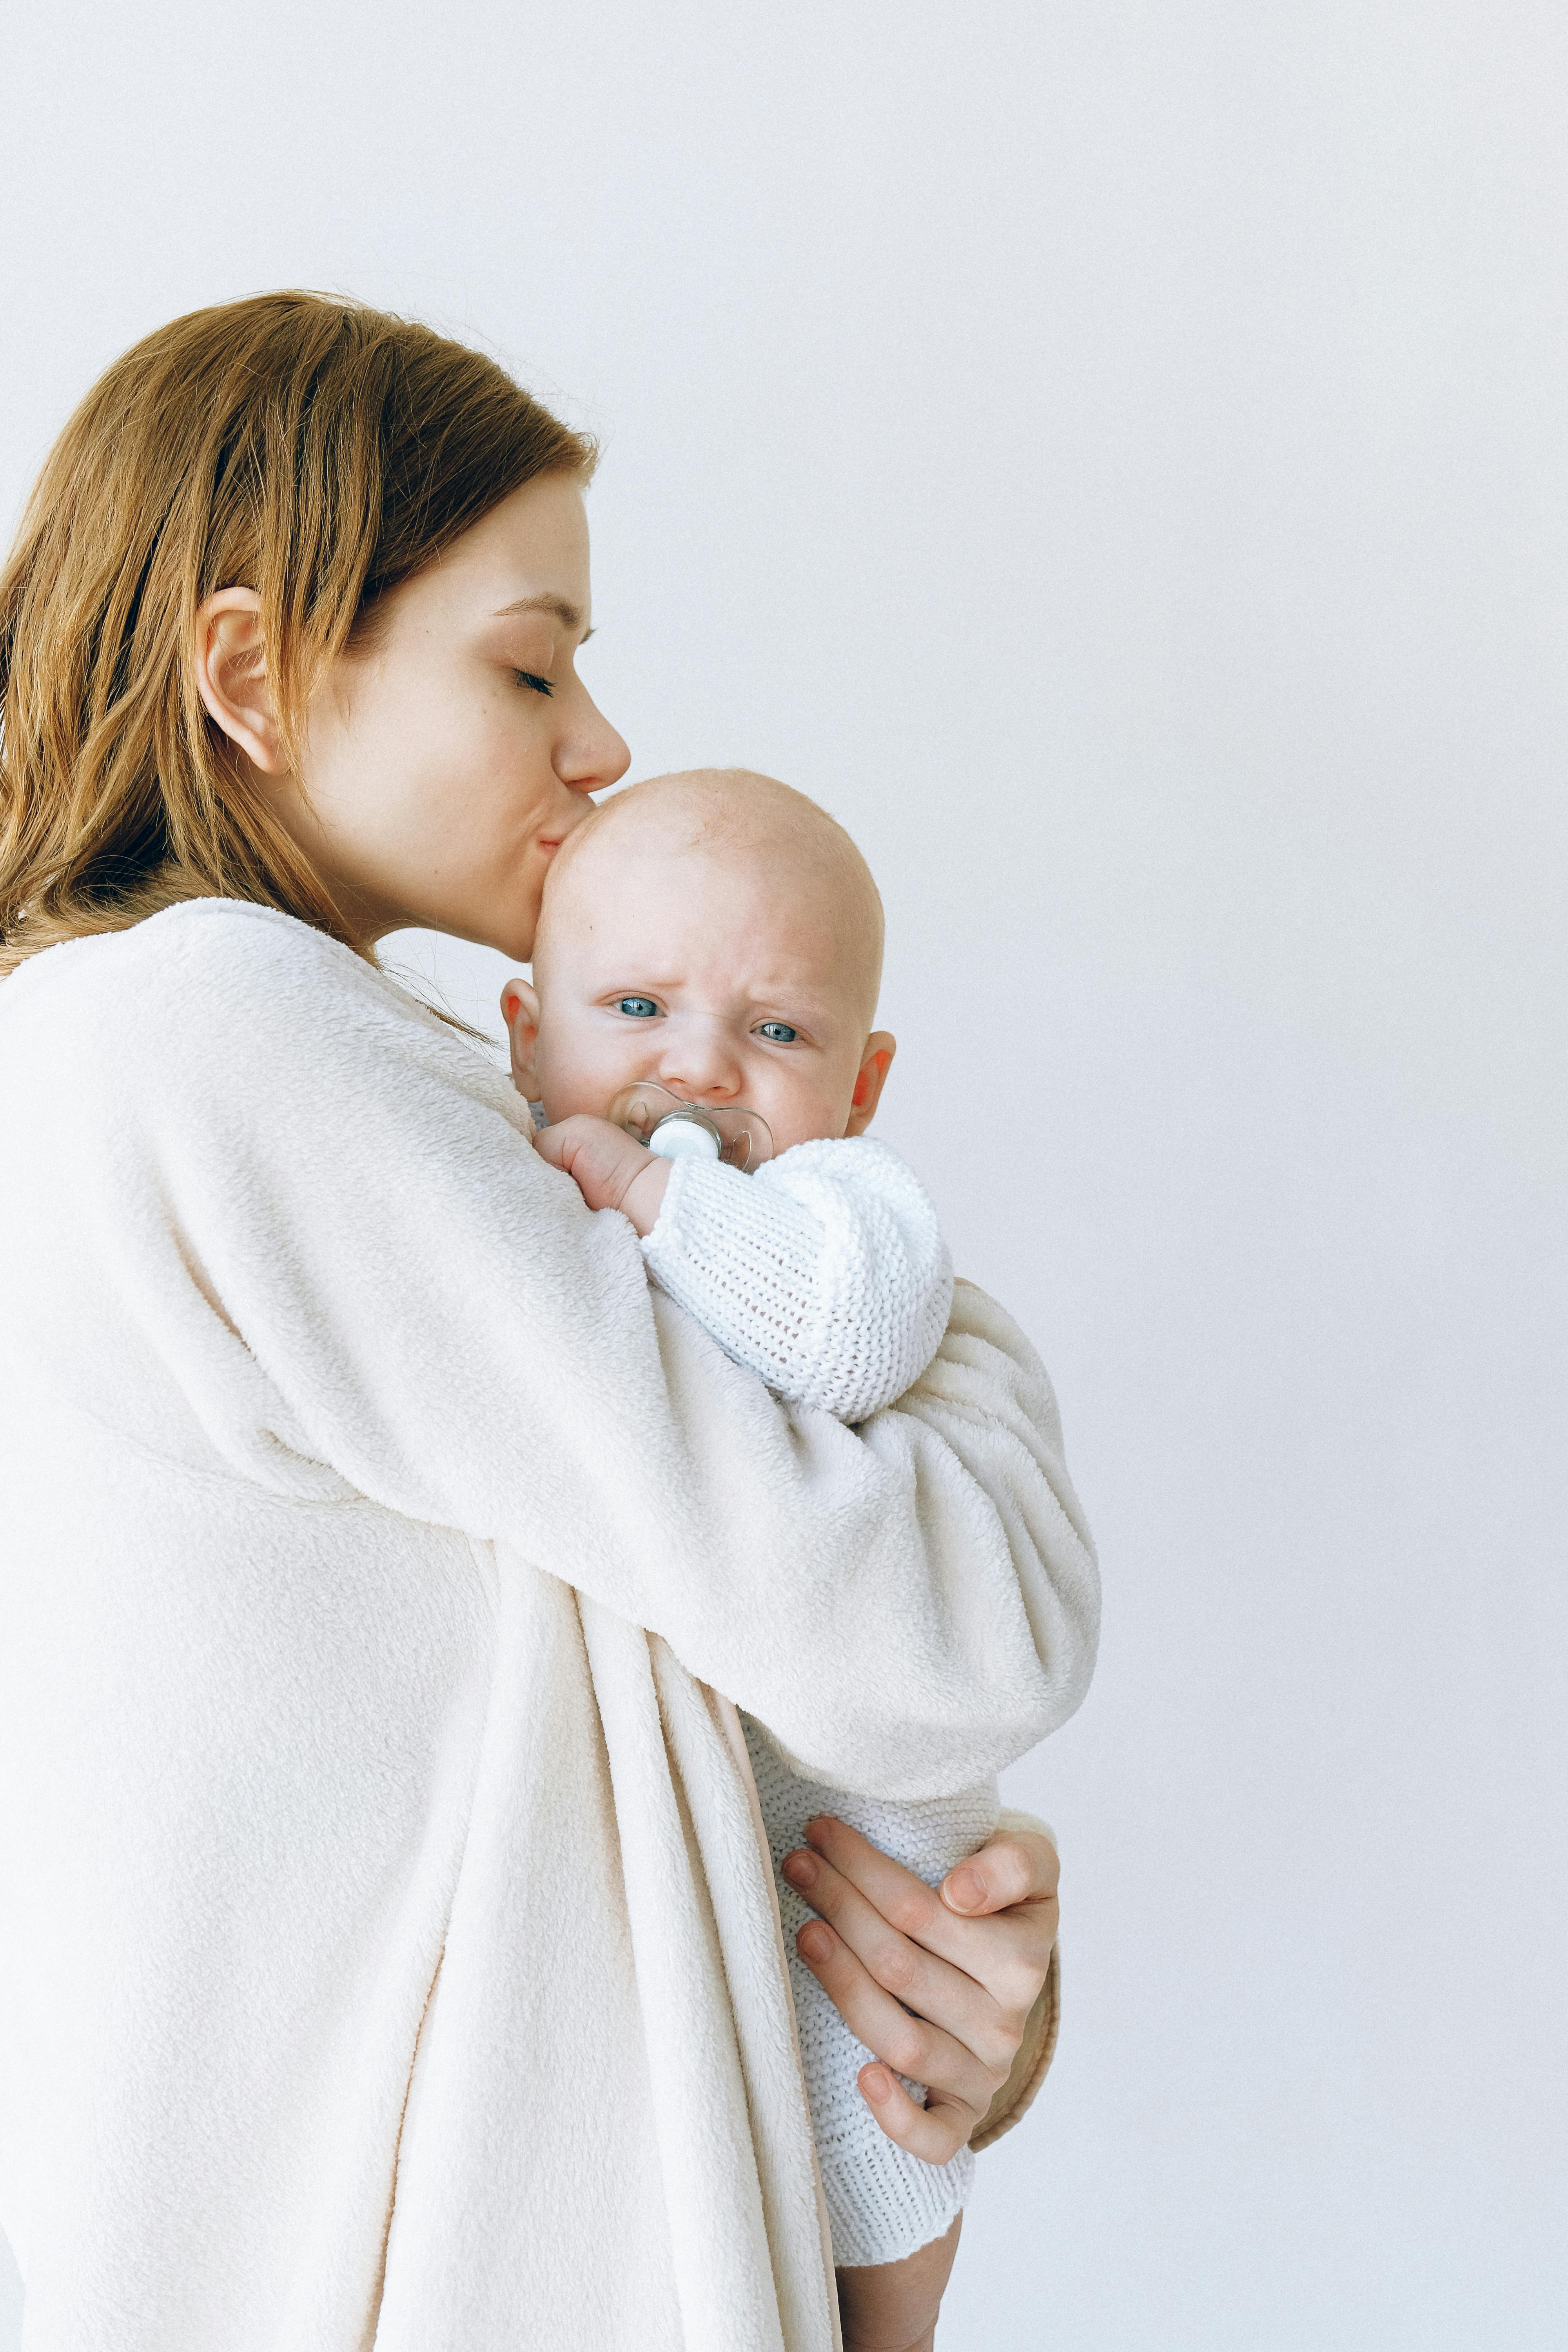 A mother kissing her baby | Source: Pexels